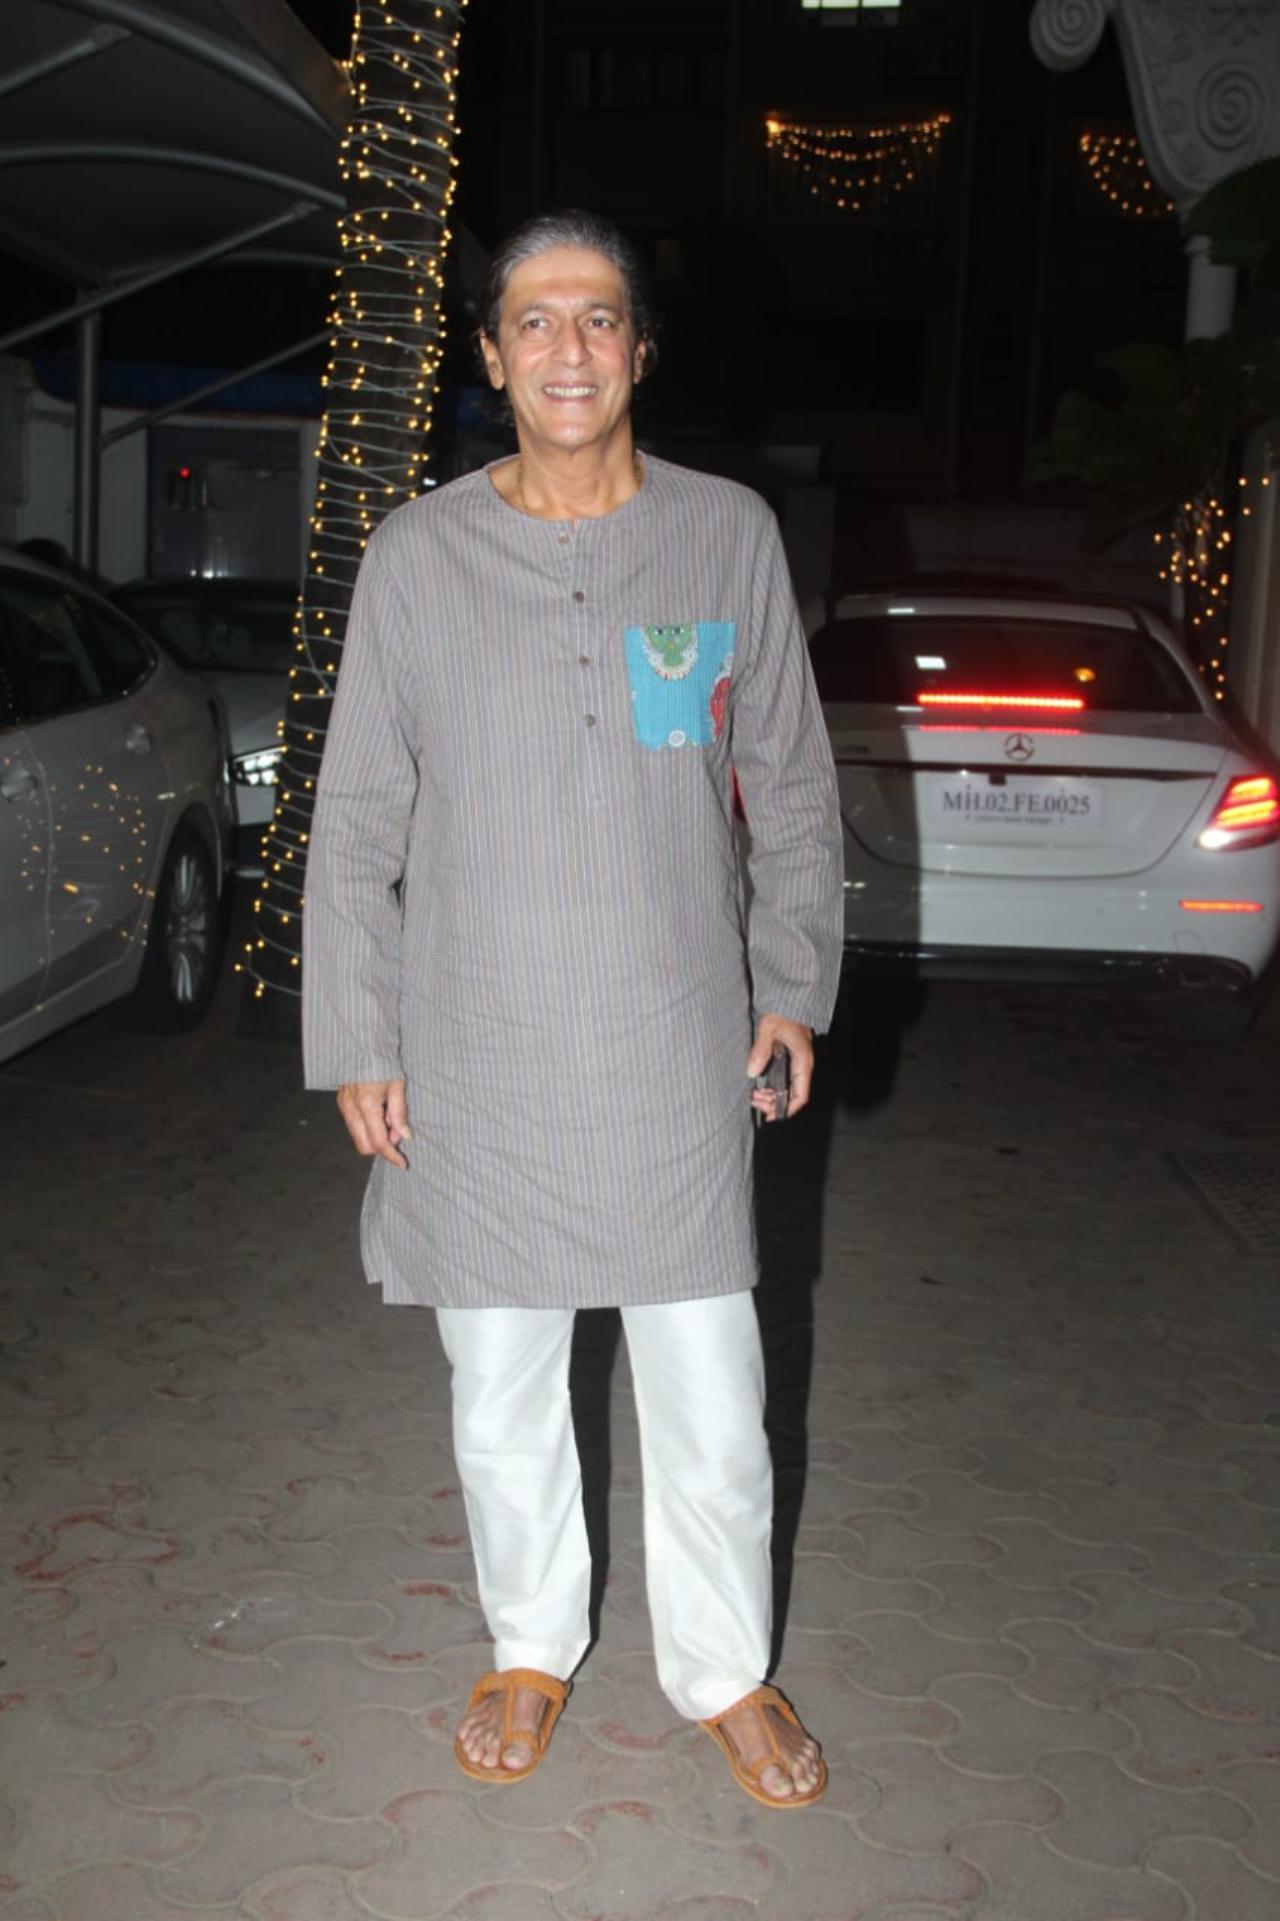 Chunky Pandey kept it simple in a grey kurta and white pajama for the party